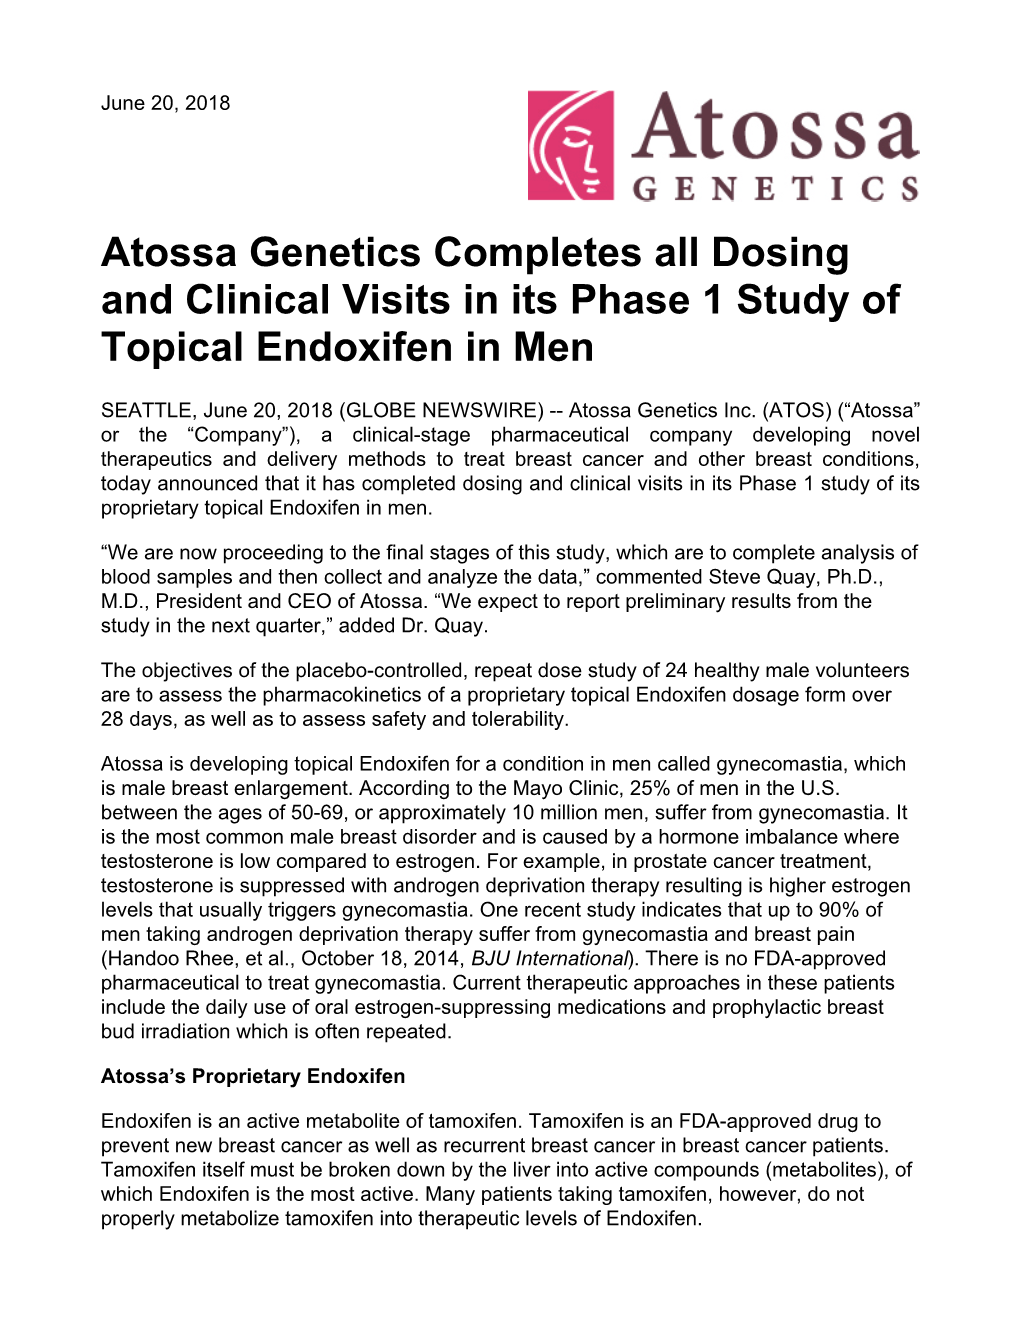 Atossa Genetics Completes All Dosing and Clinical Visits in Its Phase 1 Study of Topical Endoxifen in Men